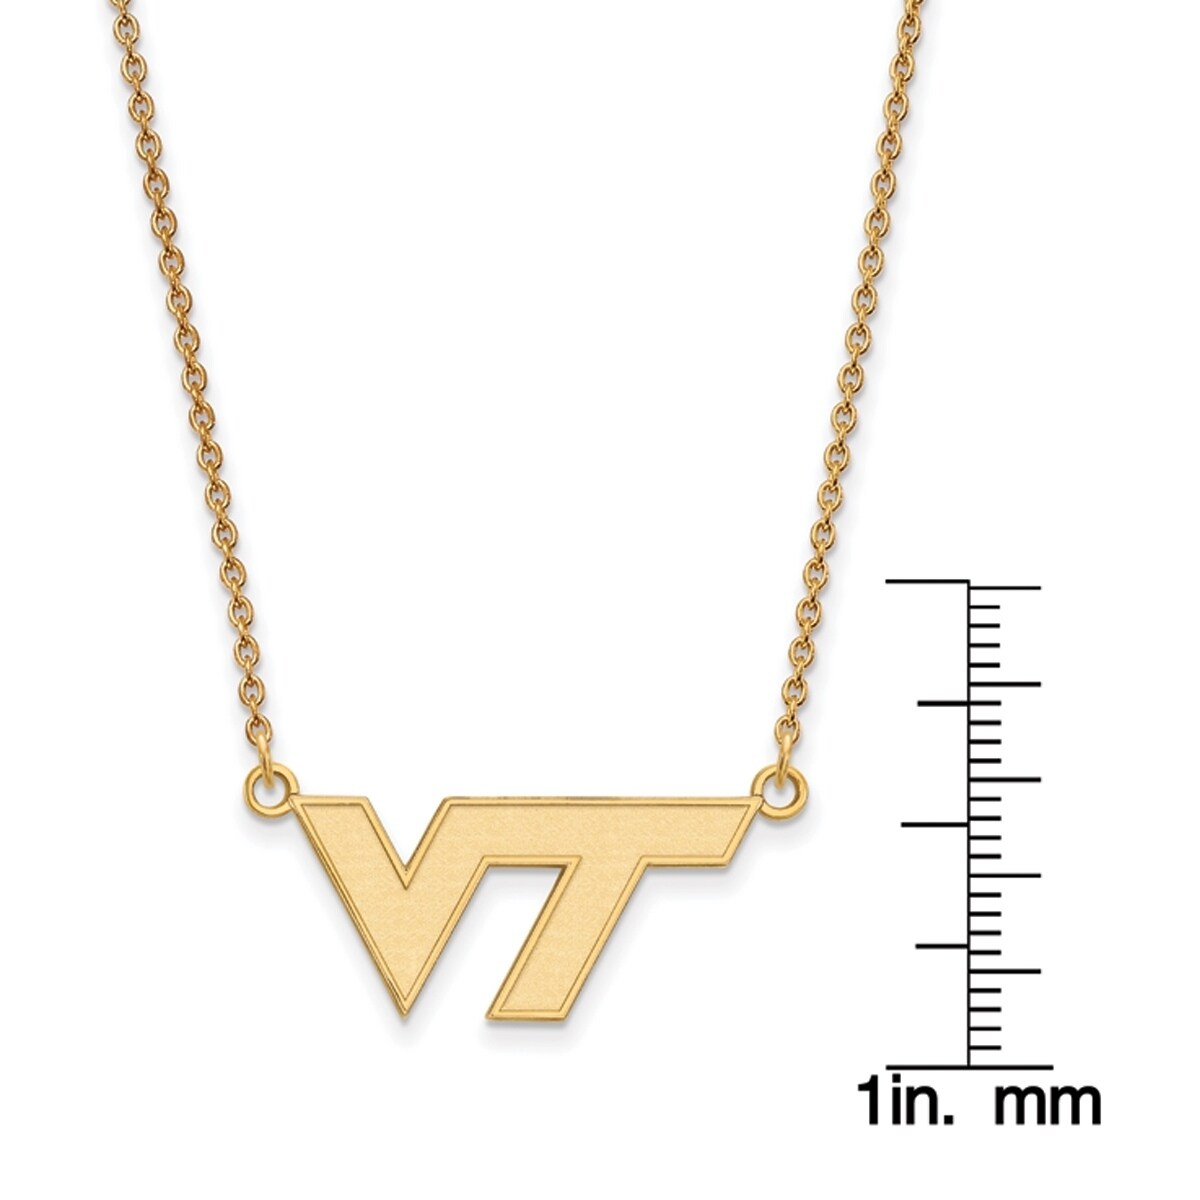 18 Gold-Plated Sterling Silver Virginia Tech Medium Pendant w/Necklace by LogoArt 